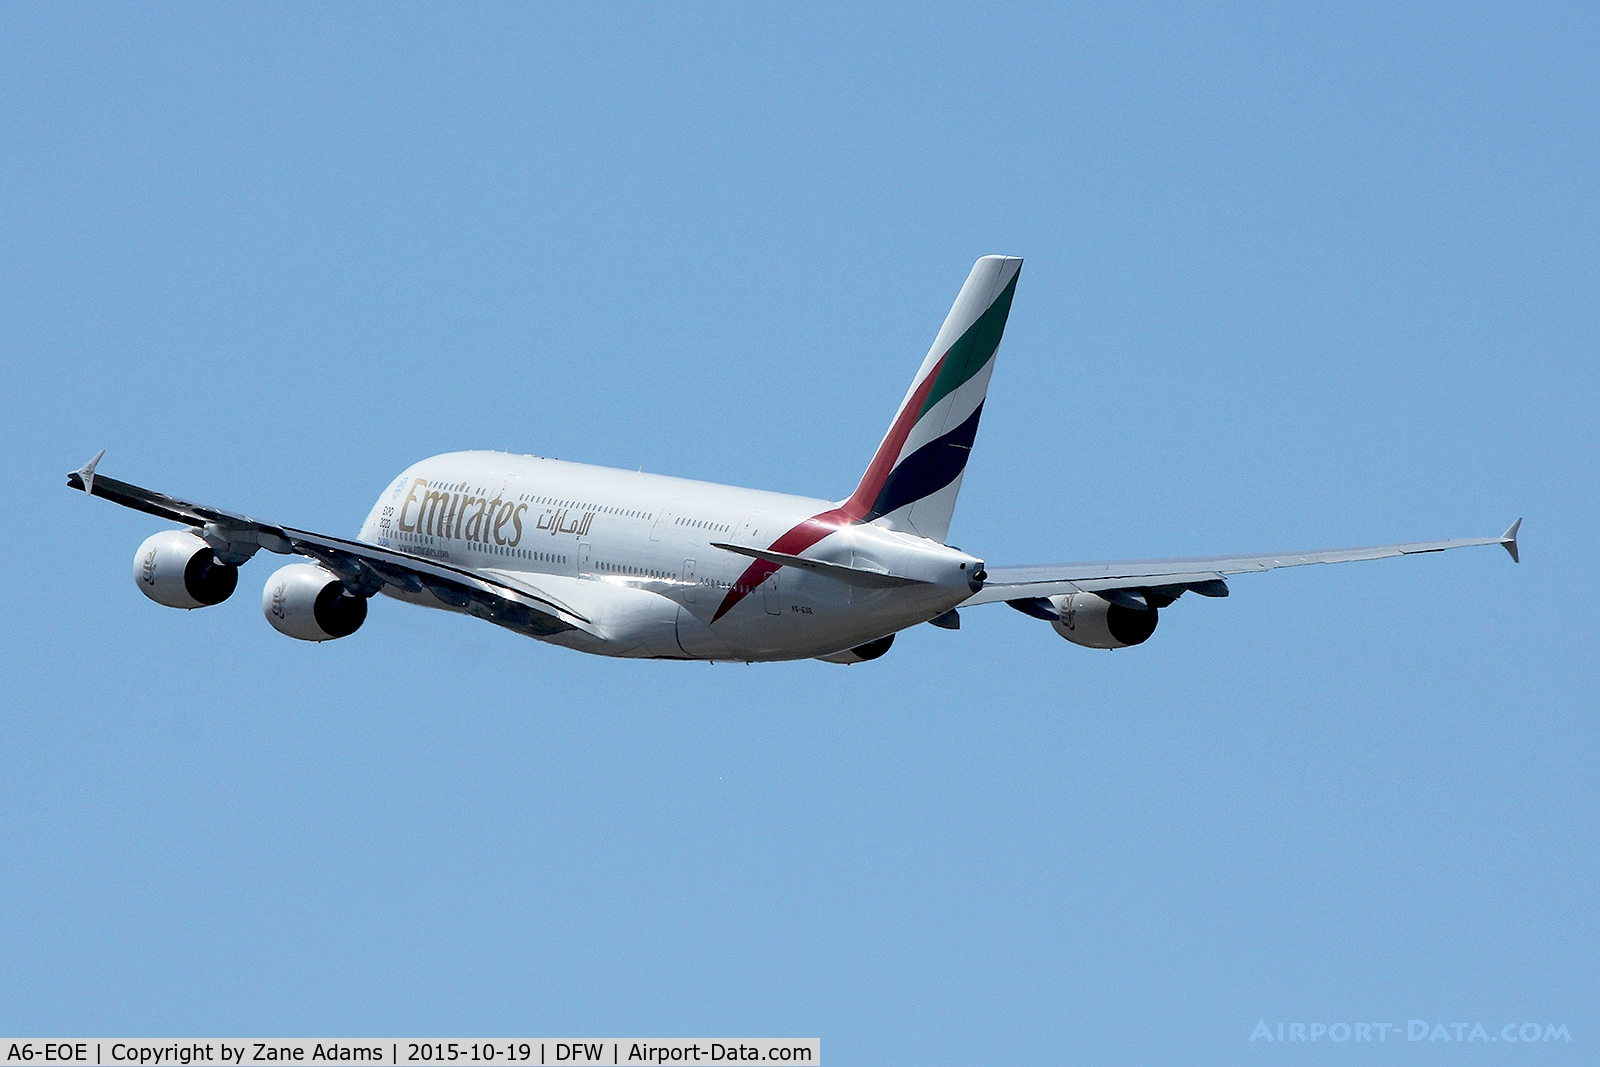 A6-EOE, 2014 Airbus A380-861 C/N 169, Departing DFW Airport